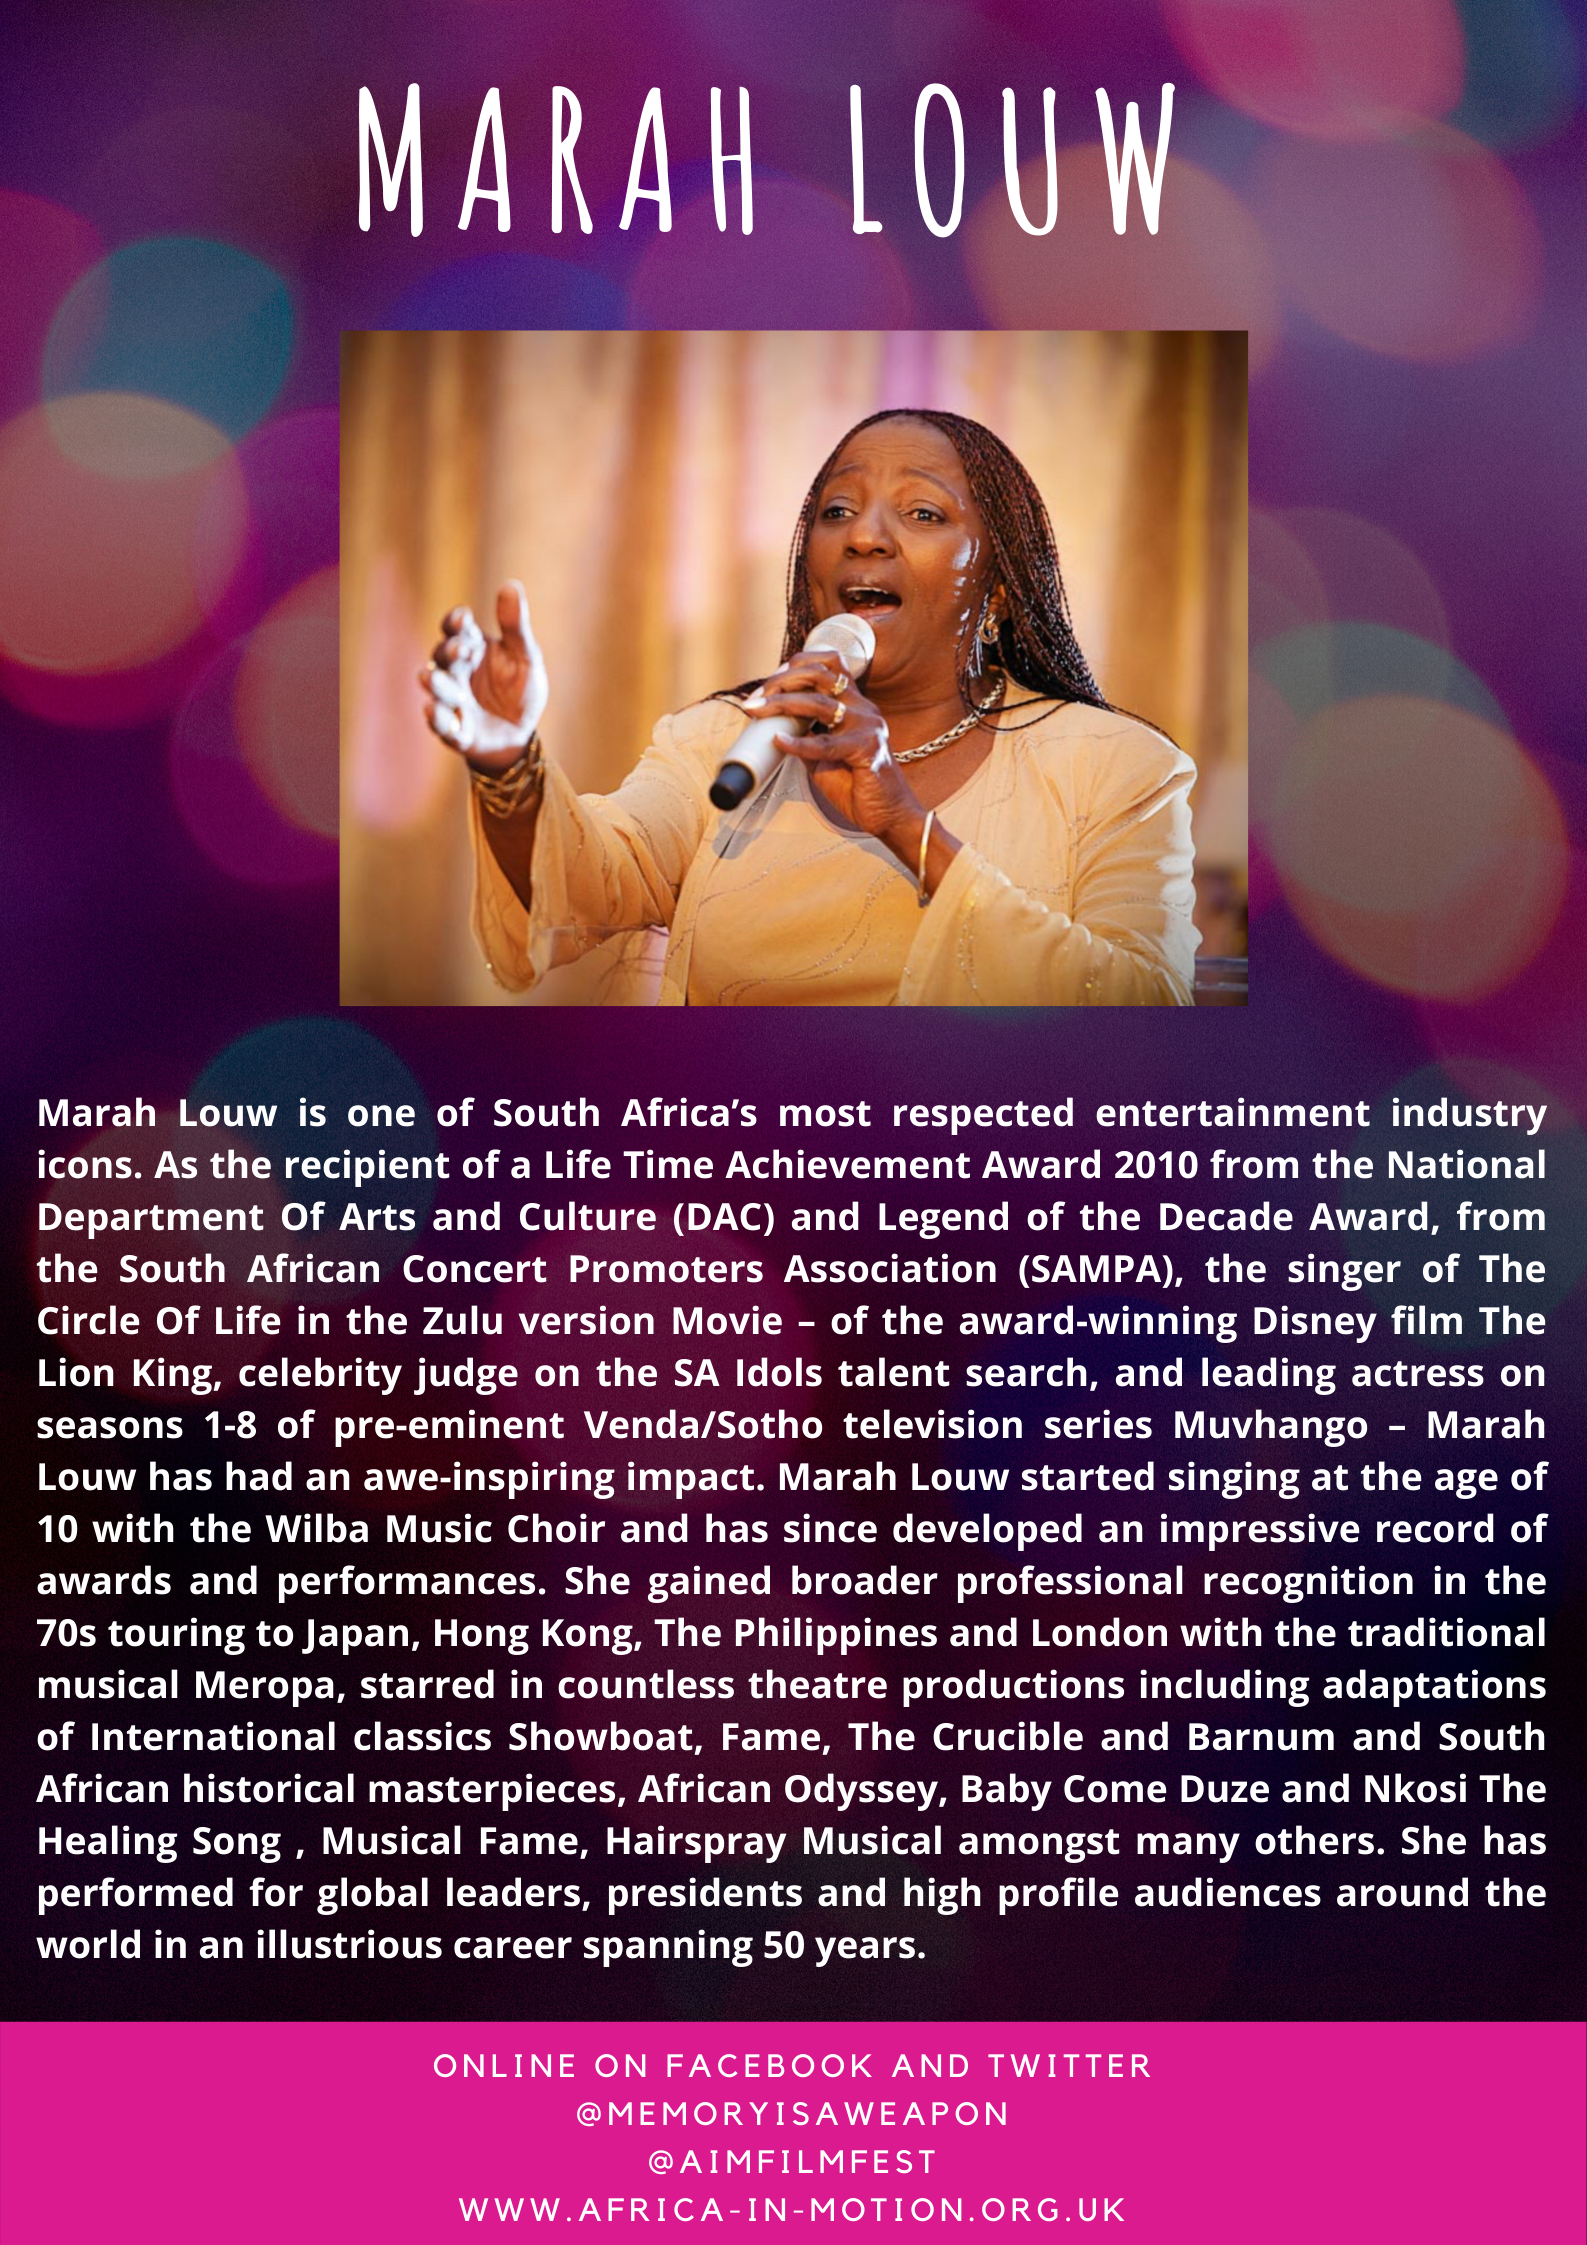 Marah Louw is one of South Africa’s most respected entertainment industry icons. As the recipient of a Life Time Achievement Award 2010 from the National Department Of Arts and Culture (DAC) and Legend of the Decade .png